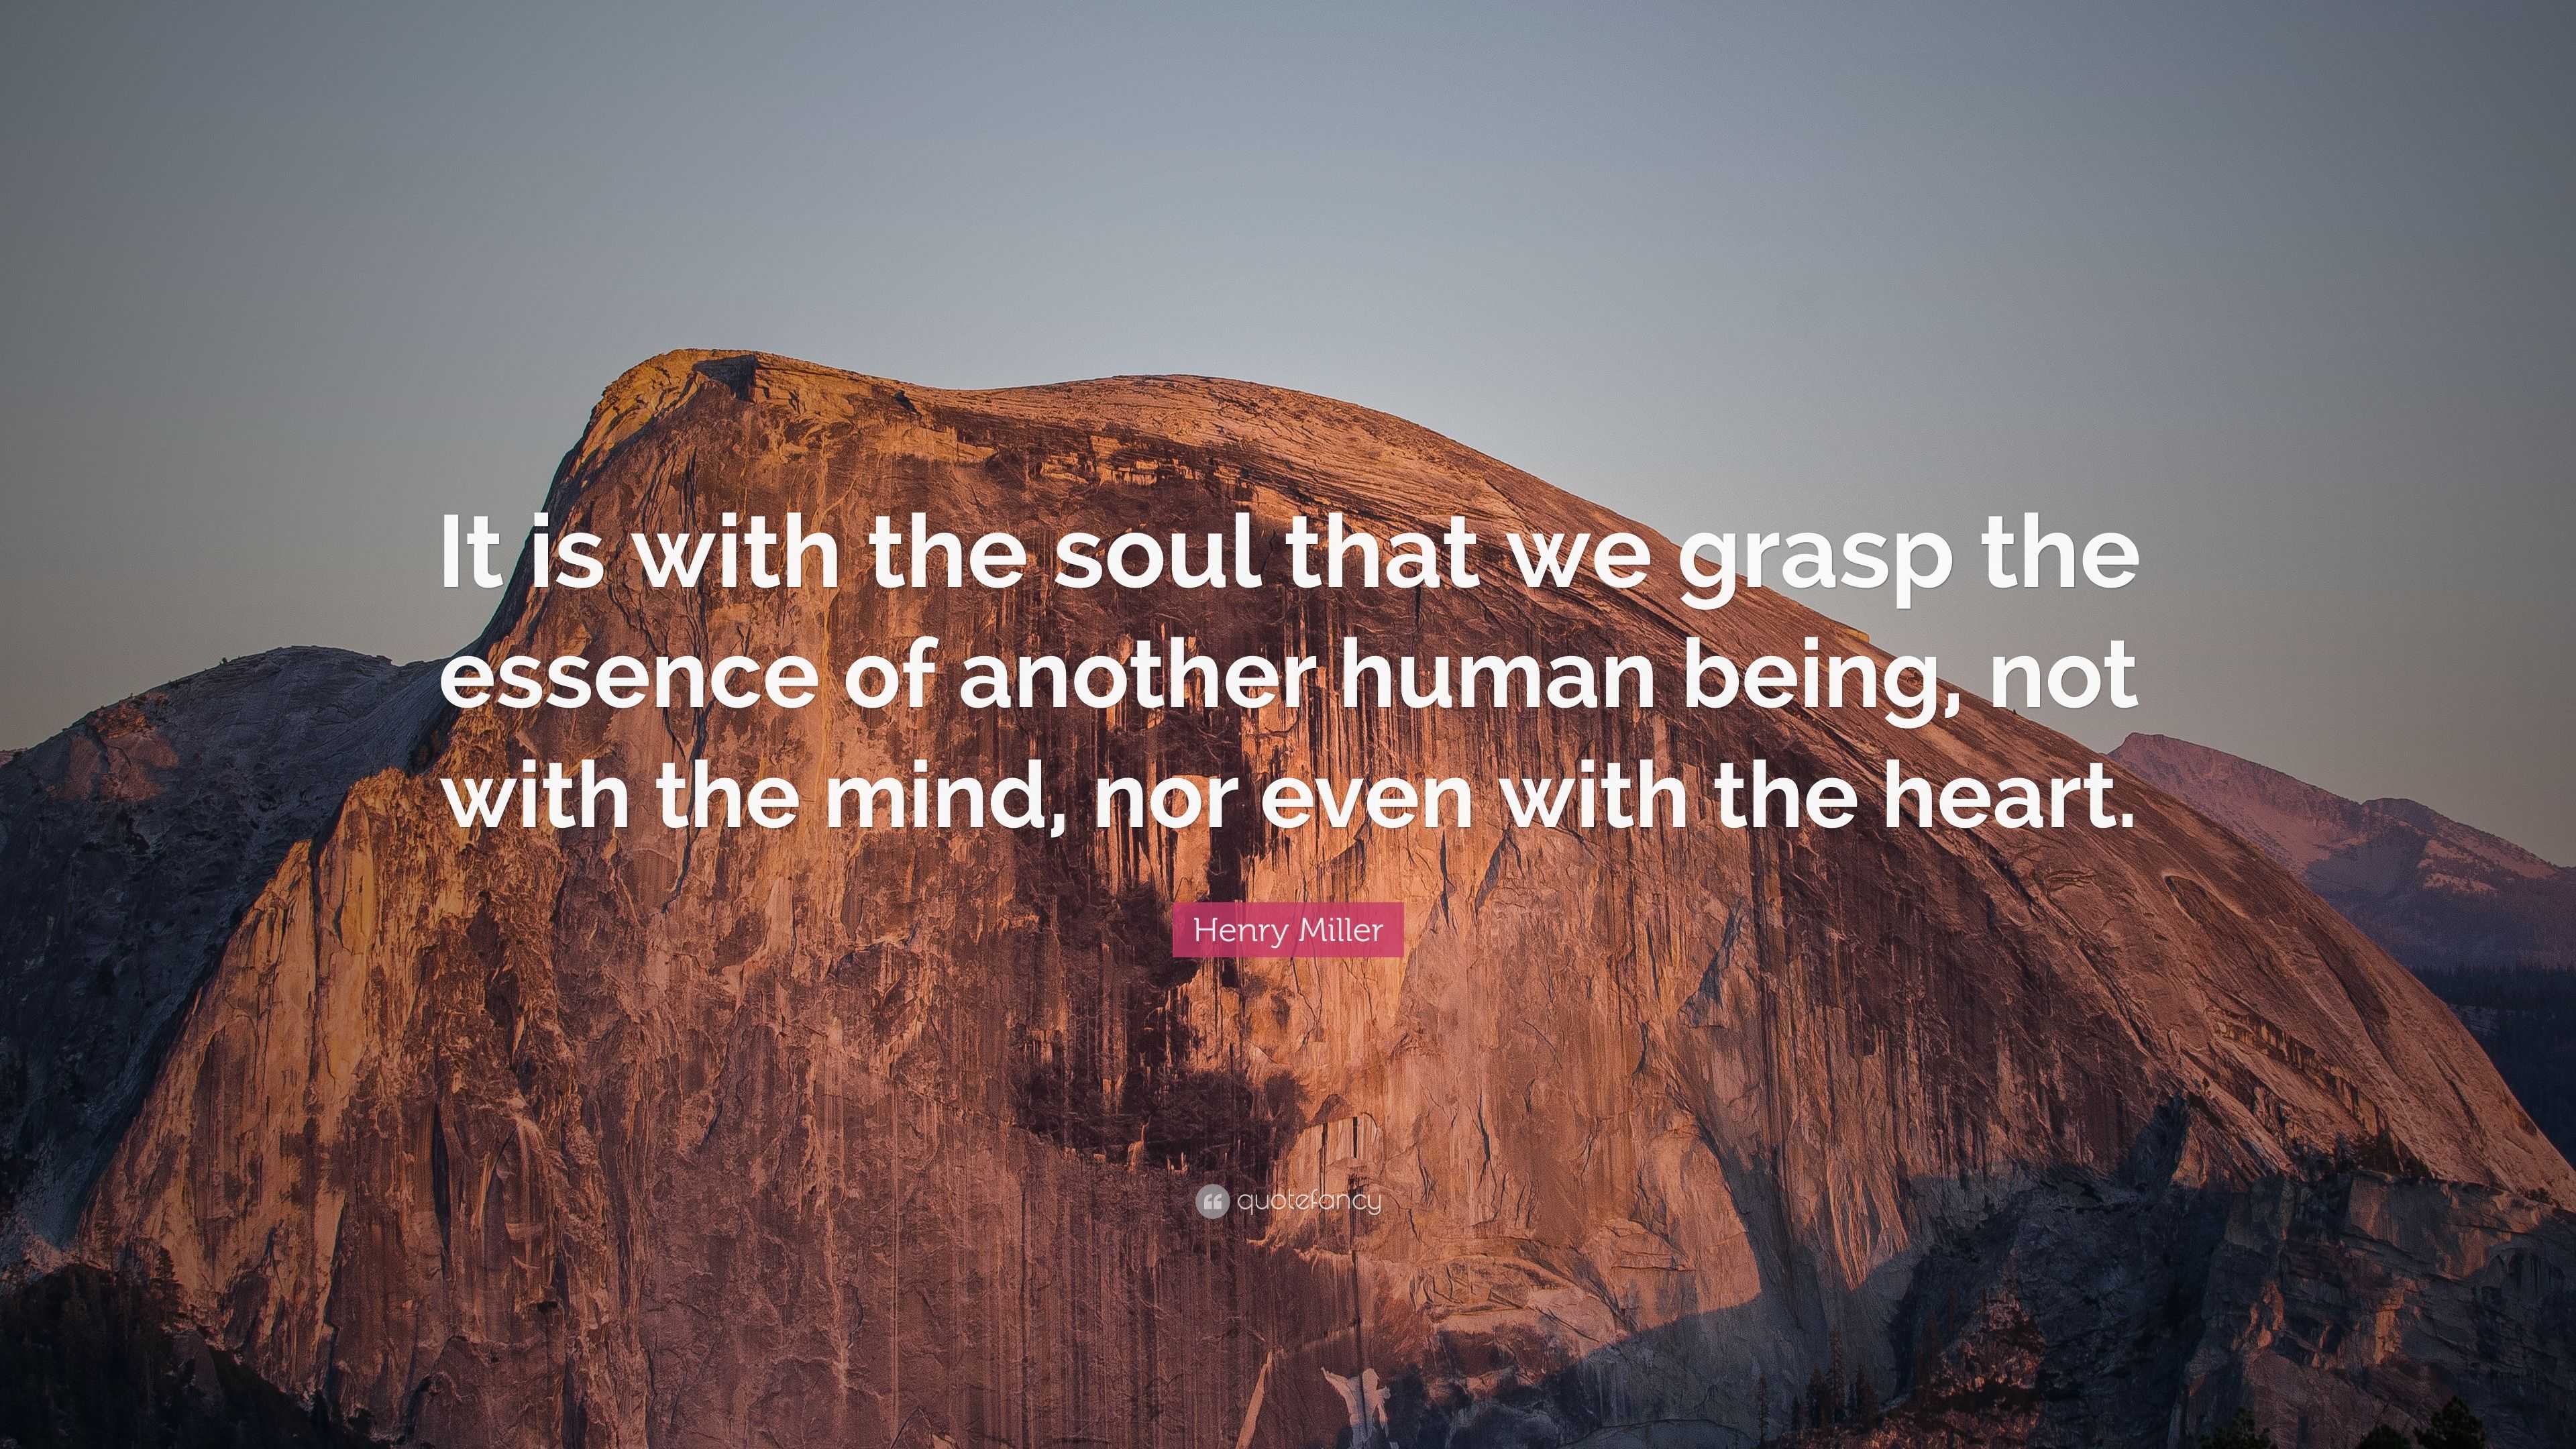 Henry Miller Quote: “It is with the soul that we grasp the essence of ...